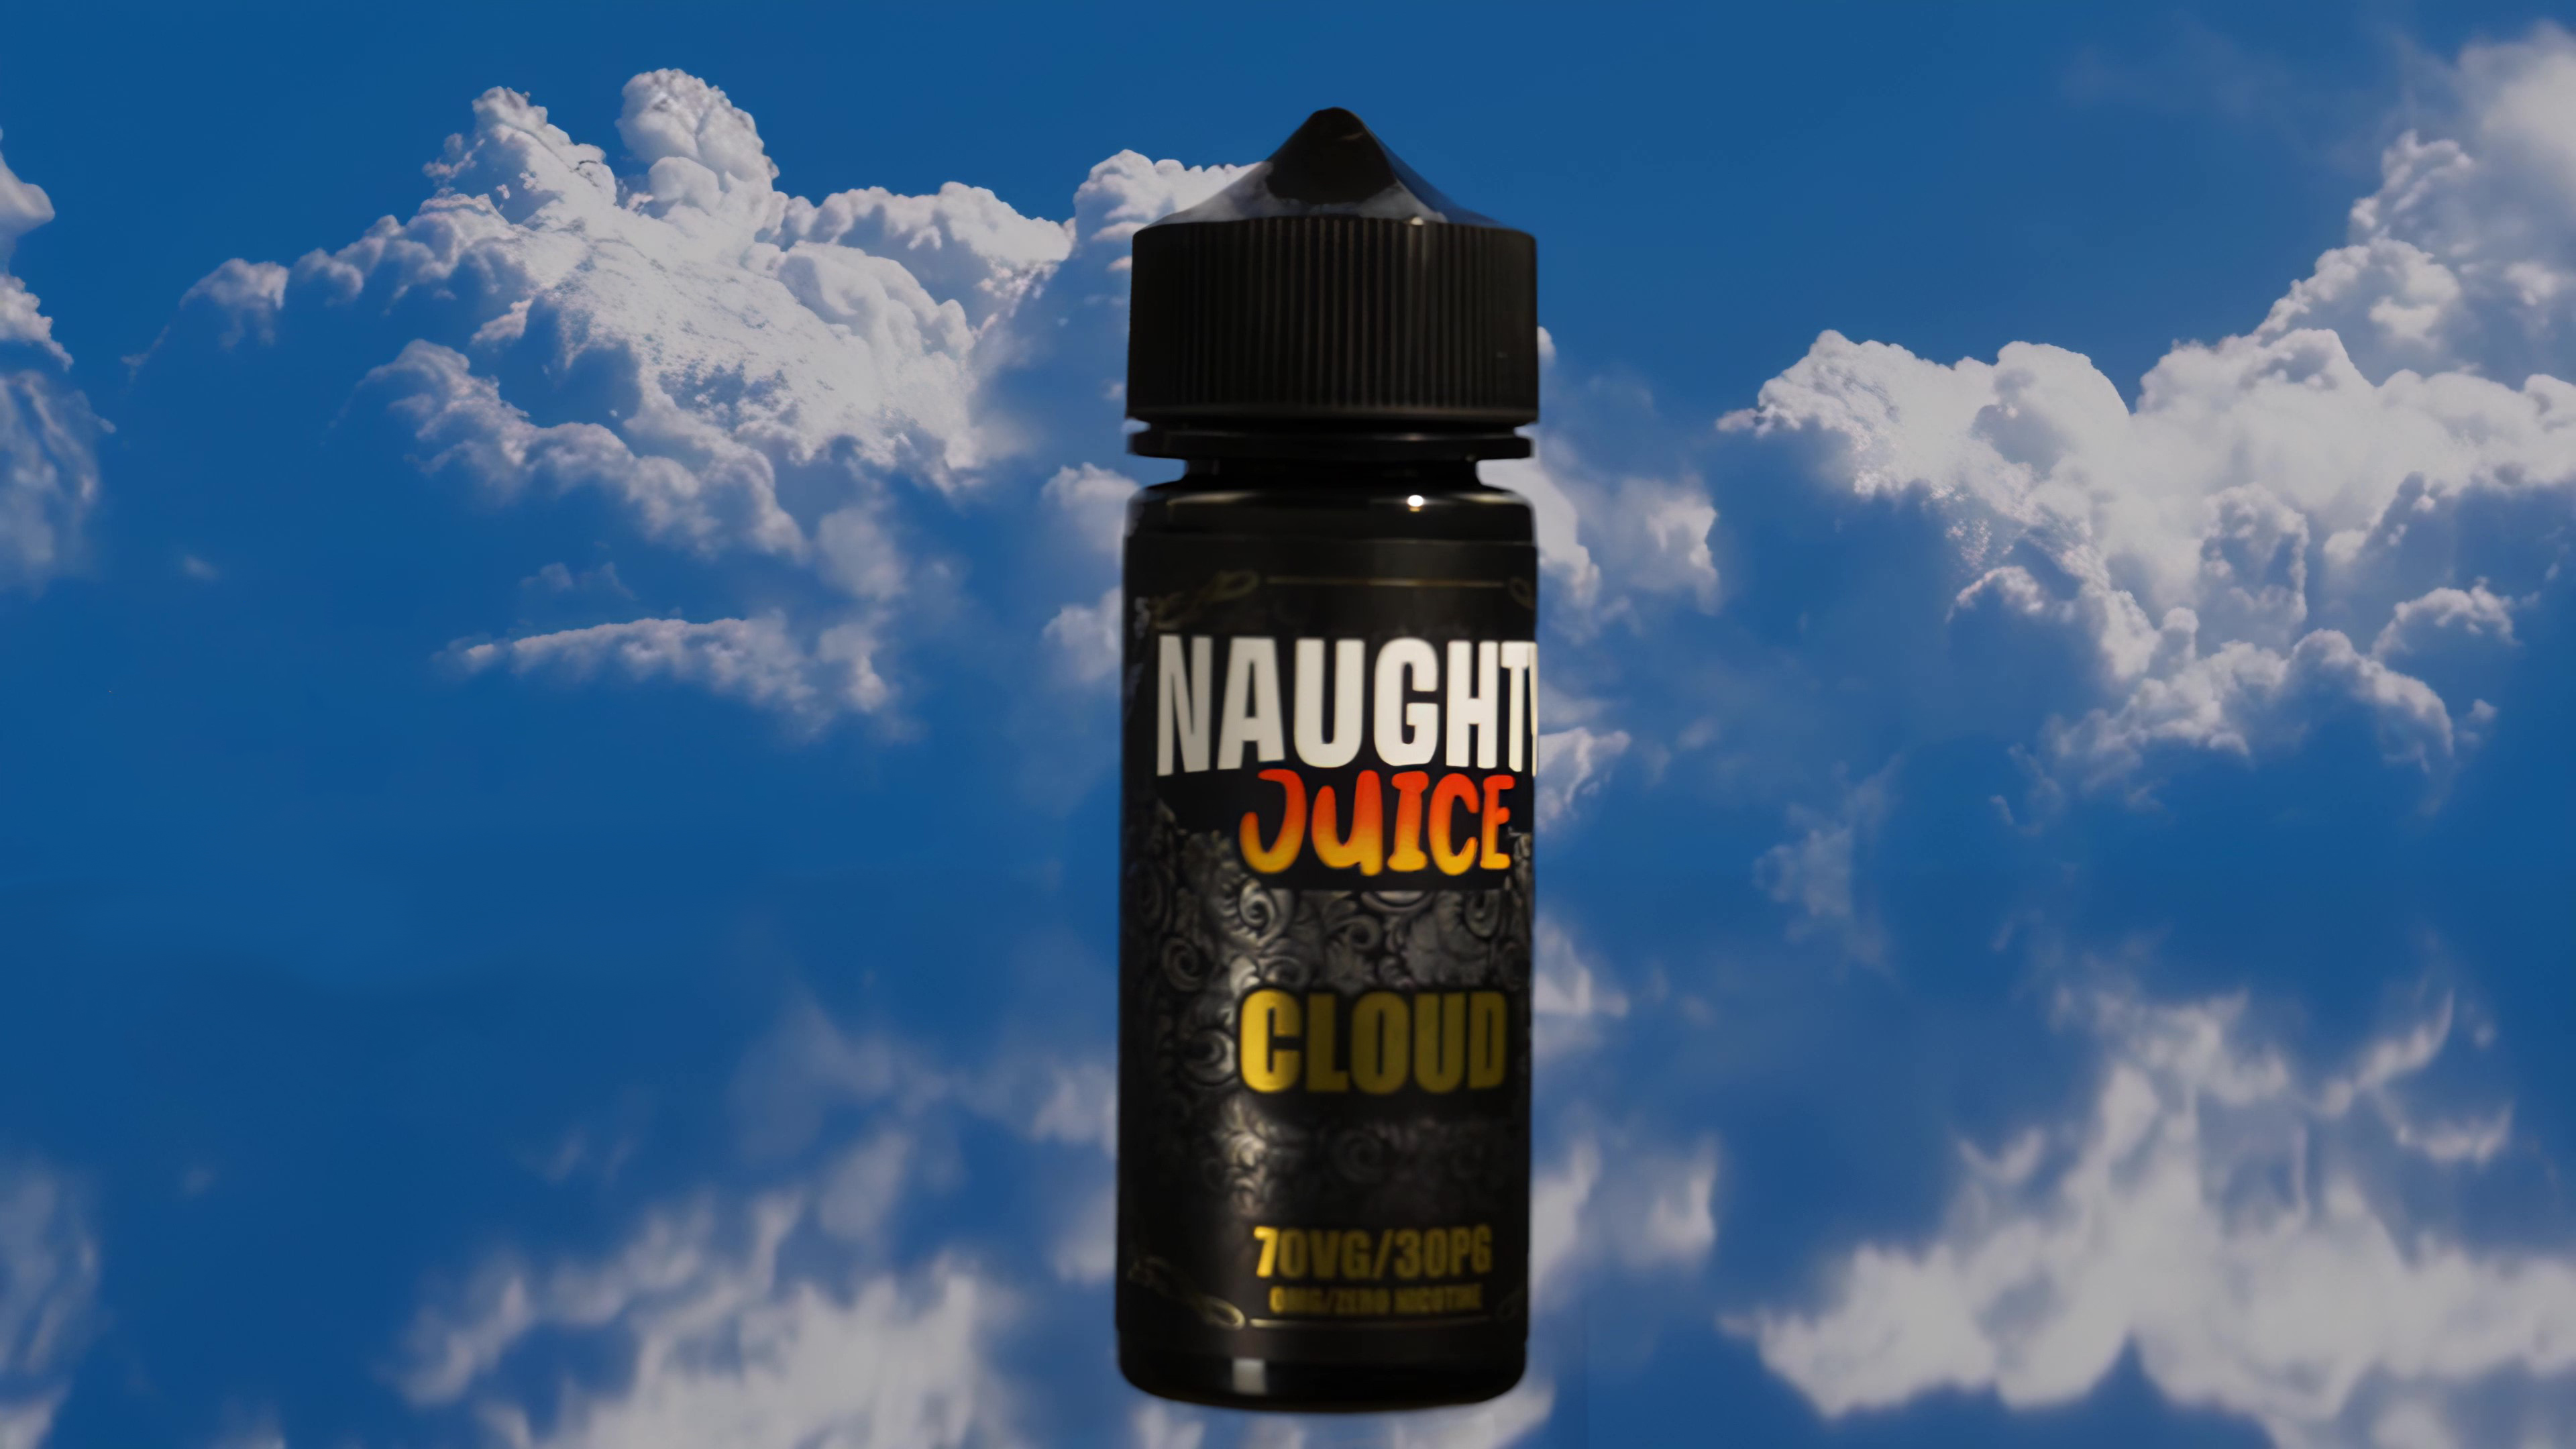 Naughty Juice Cloud Video Production
